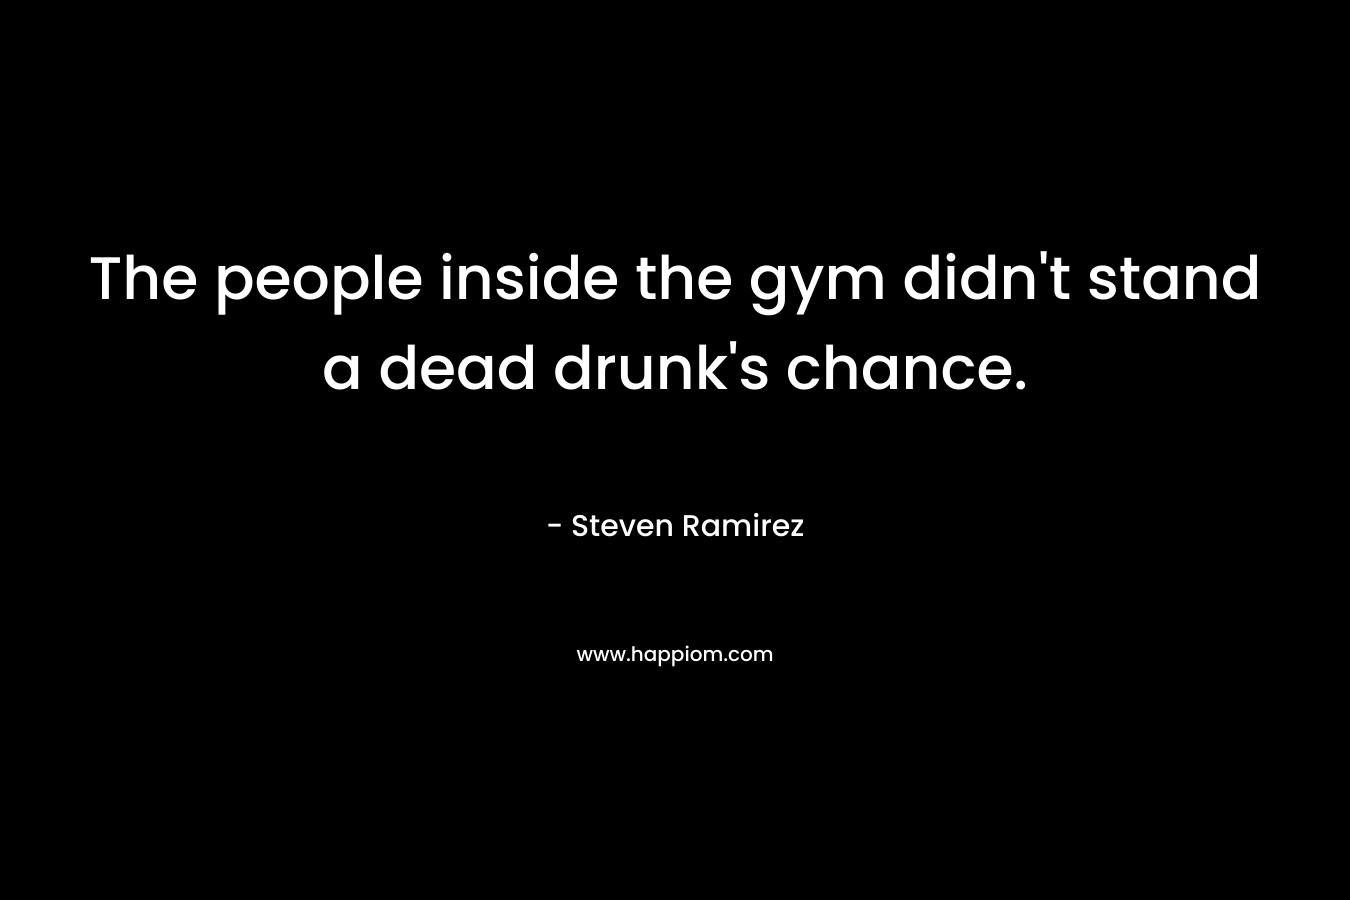 The people inside the gym didn’t stand a dead drunk’s chance. – Steven Ramirez